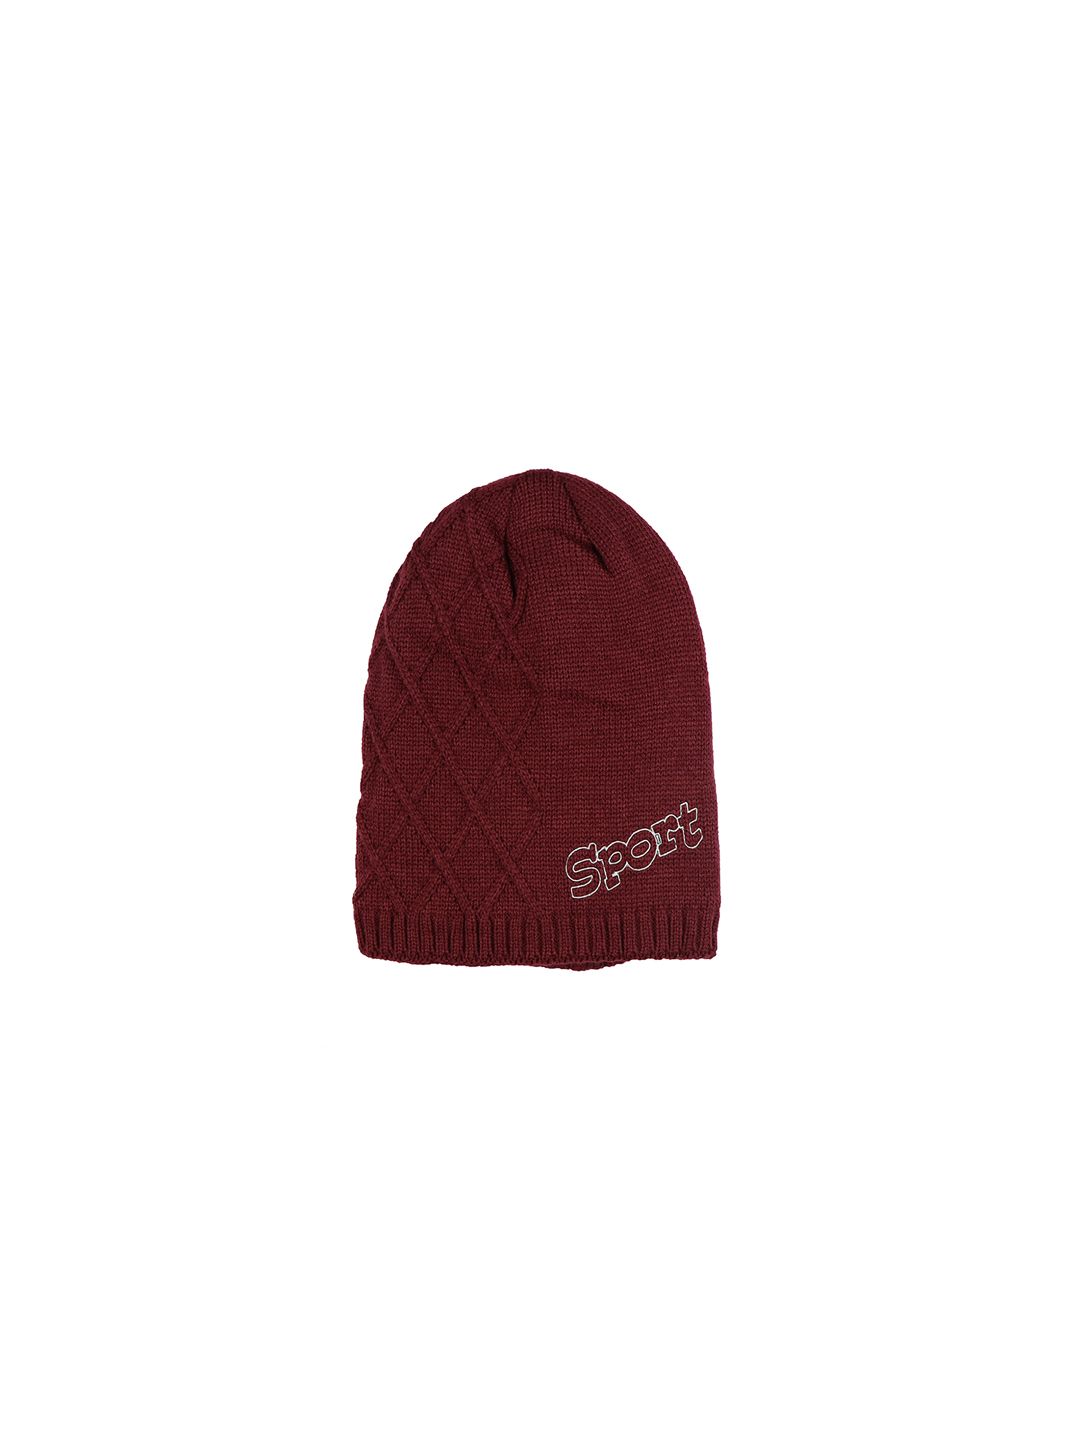 iSWEVEN Unisex Maroon Solid Beanie Price in India